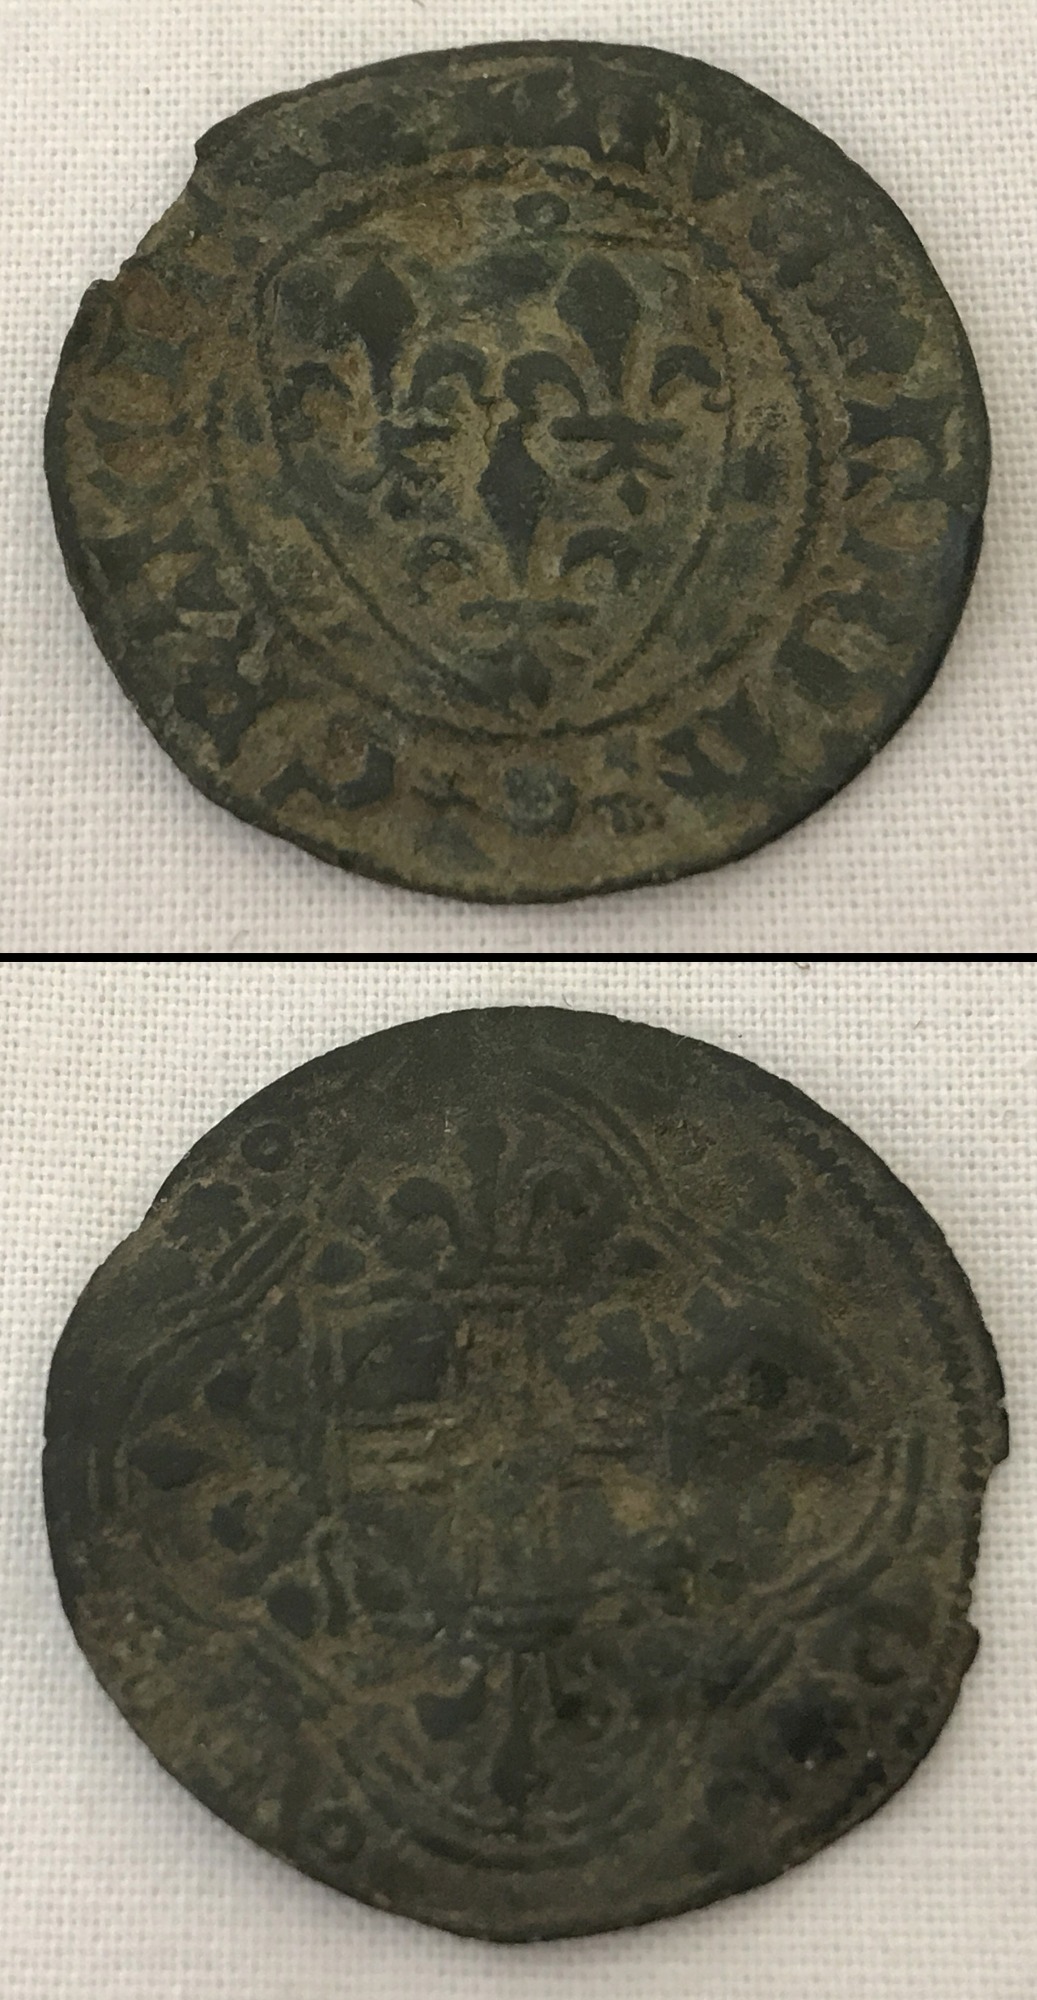 A medieval French Jetton accounting token, circa 14th-15th Century.